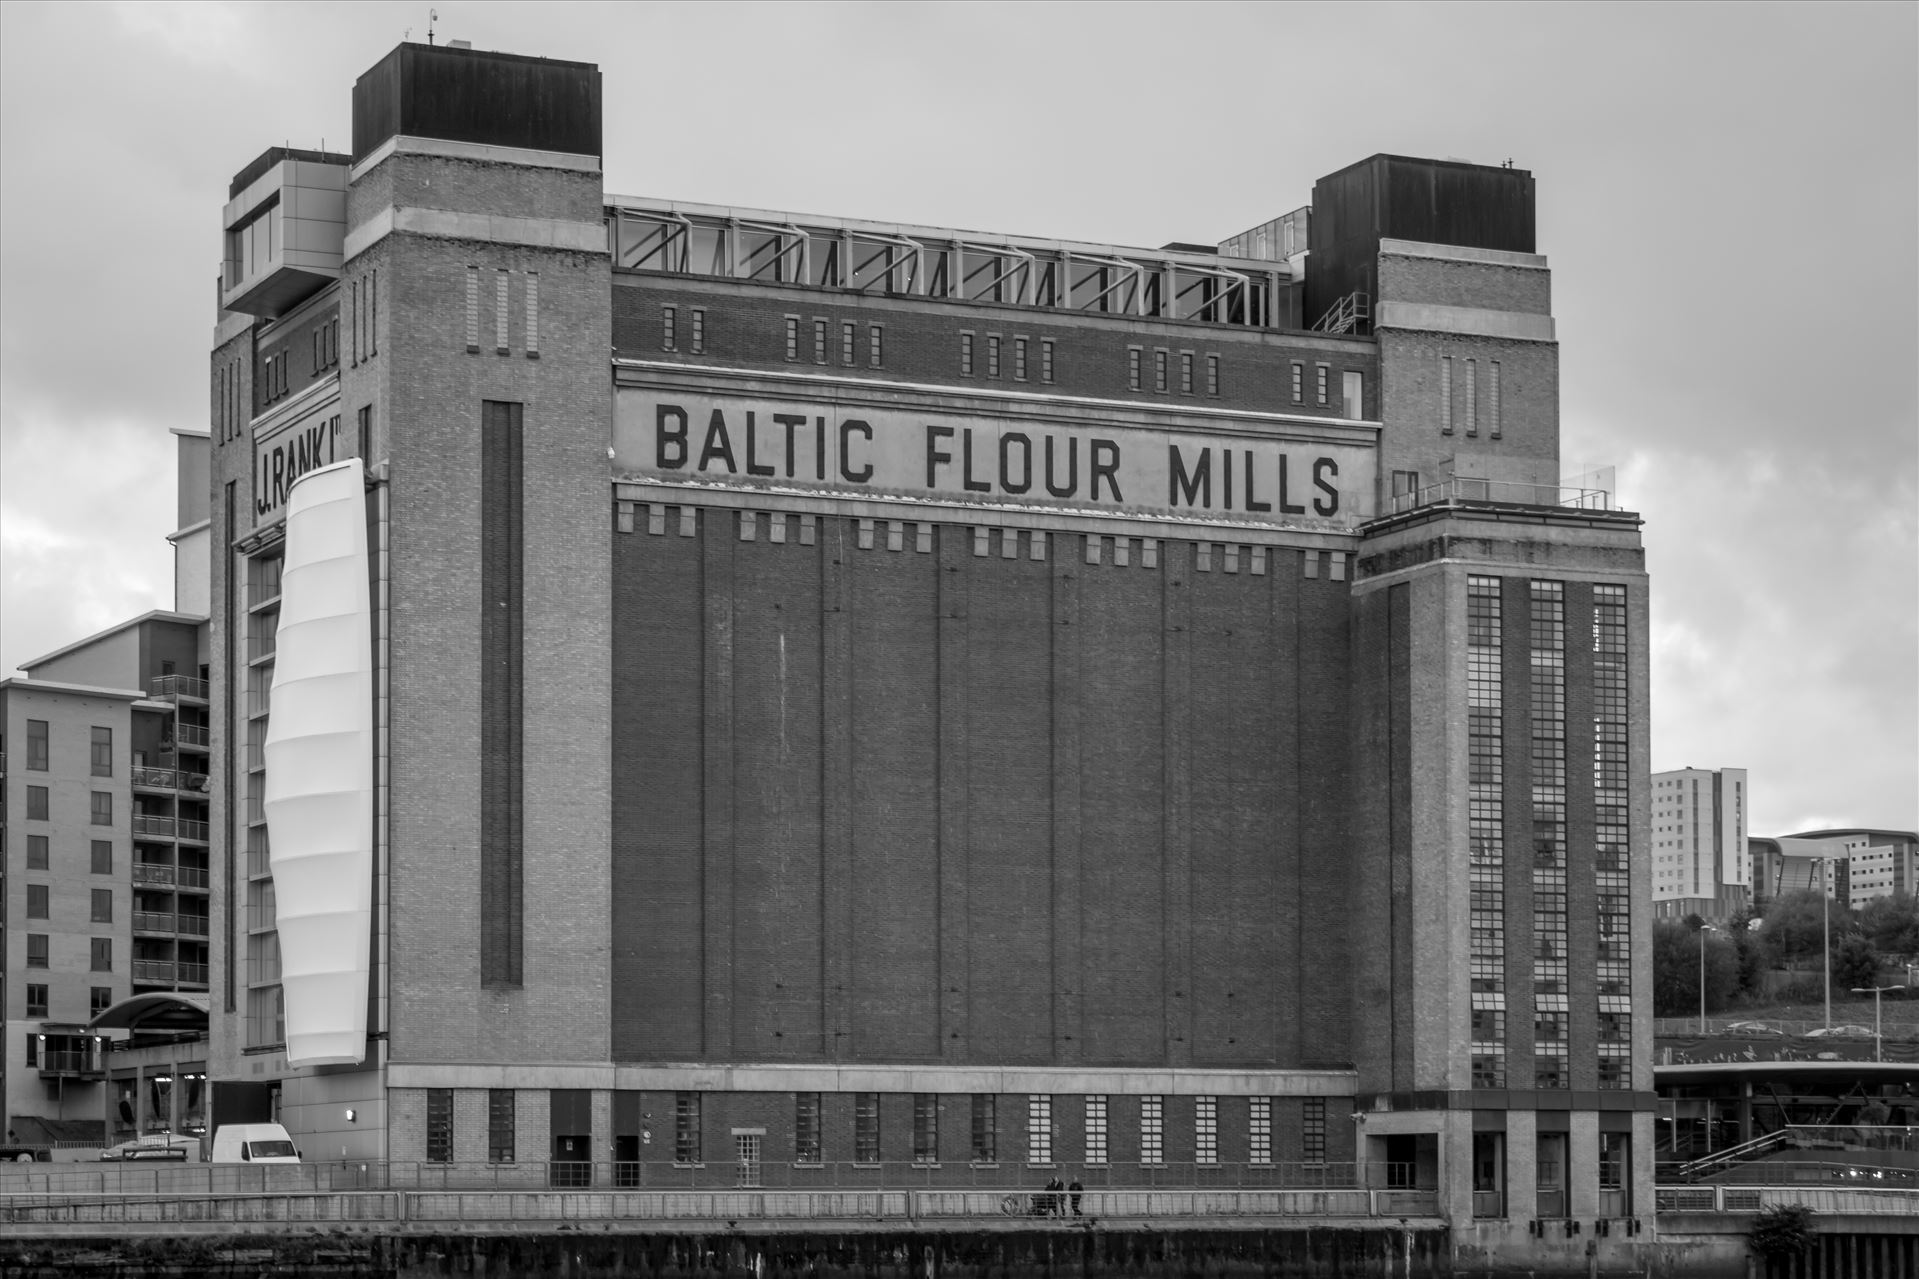 The Baltic, Gateshead Quayside Housed in the Landmark, J R Rank Flour Mill building, its a major International centre for contemporary art. 2,600 square metres of art space, and boasts a rooftop restaurant with magnificent view of the River Tyne and Quayside. by Graham Dobson Photography